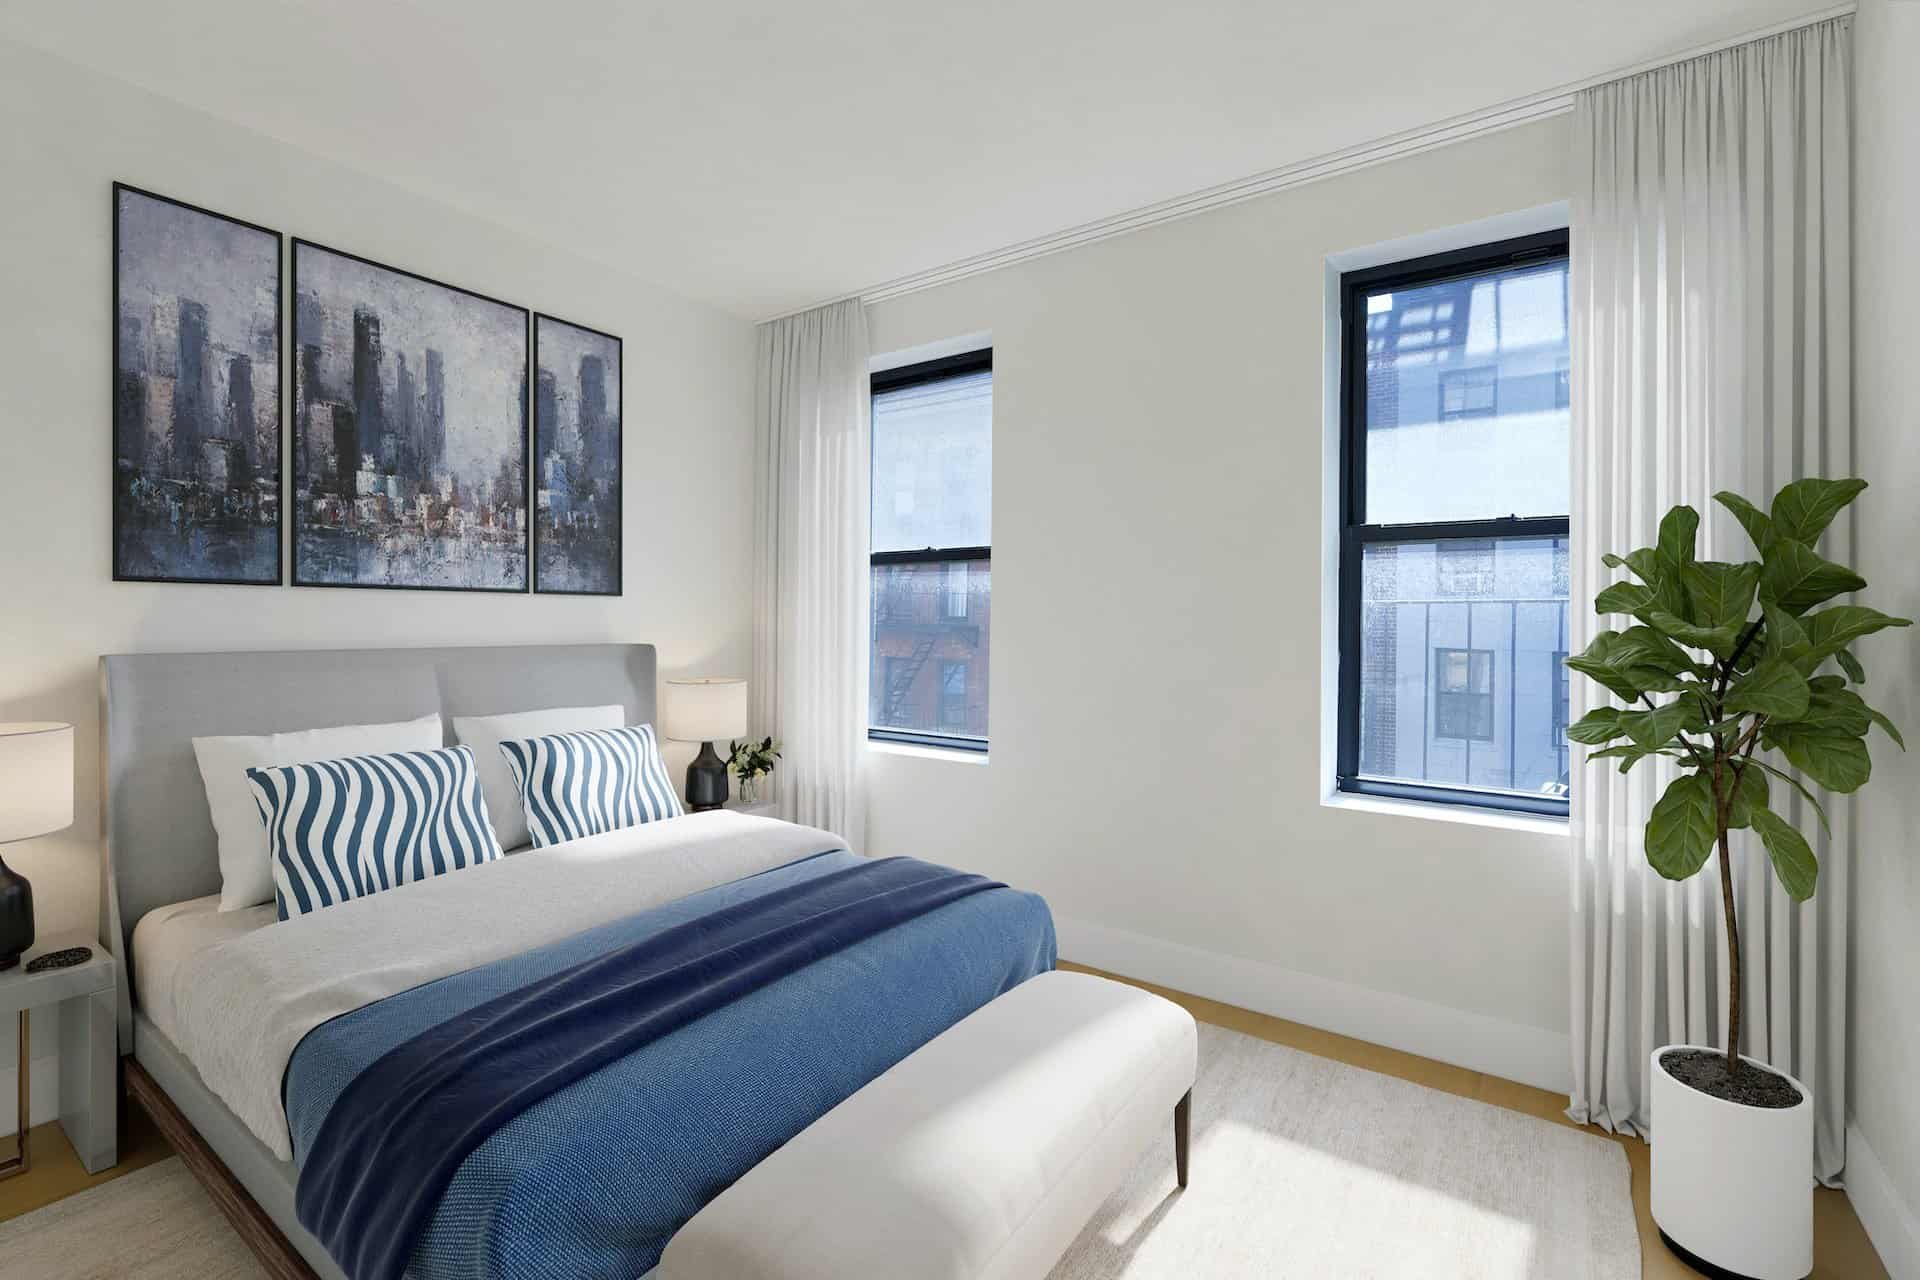 Bedroom at 151-153 Ludlow Street apartments with a queen size bed, headboard, side tables, two windows and hardwood floors.